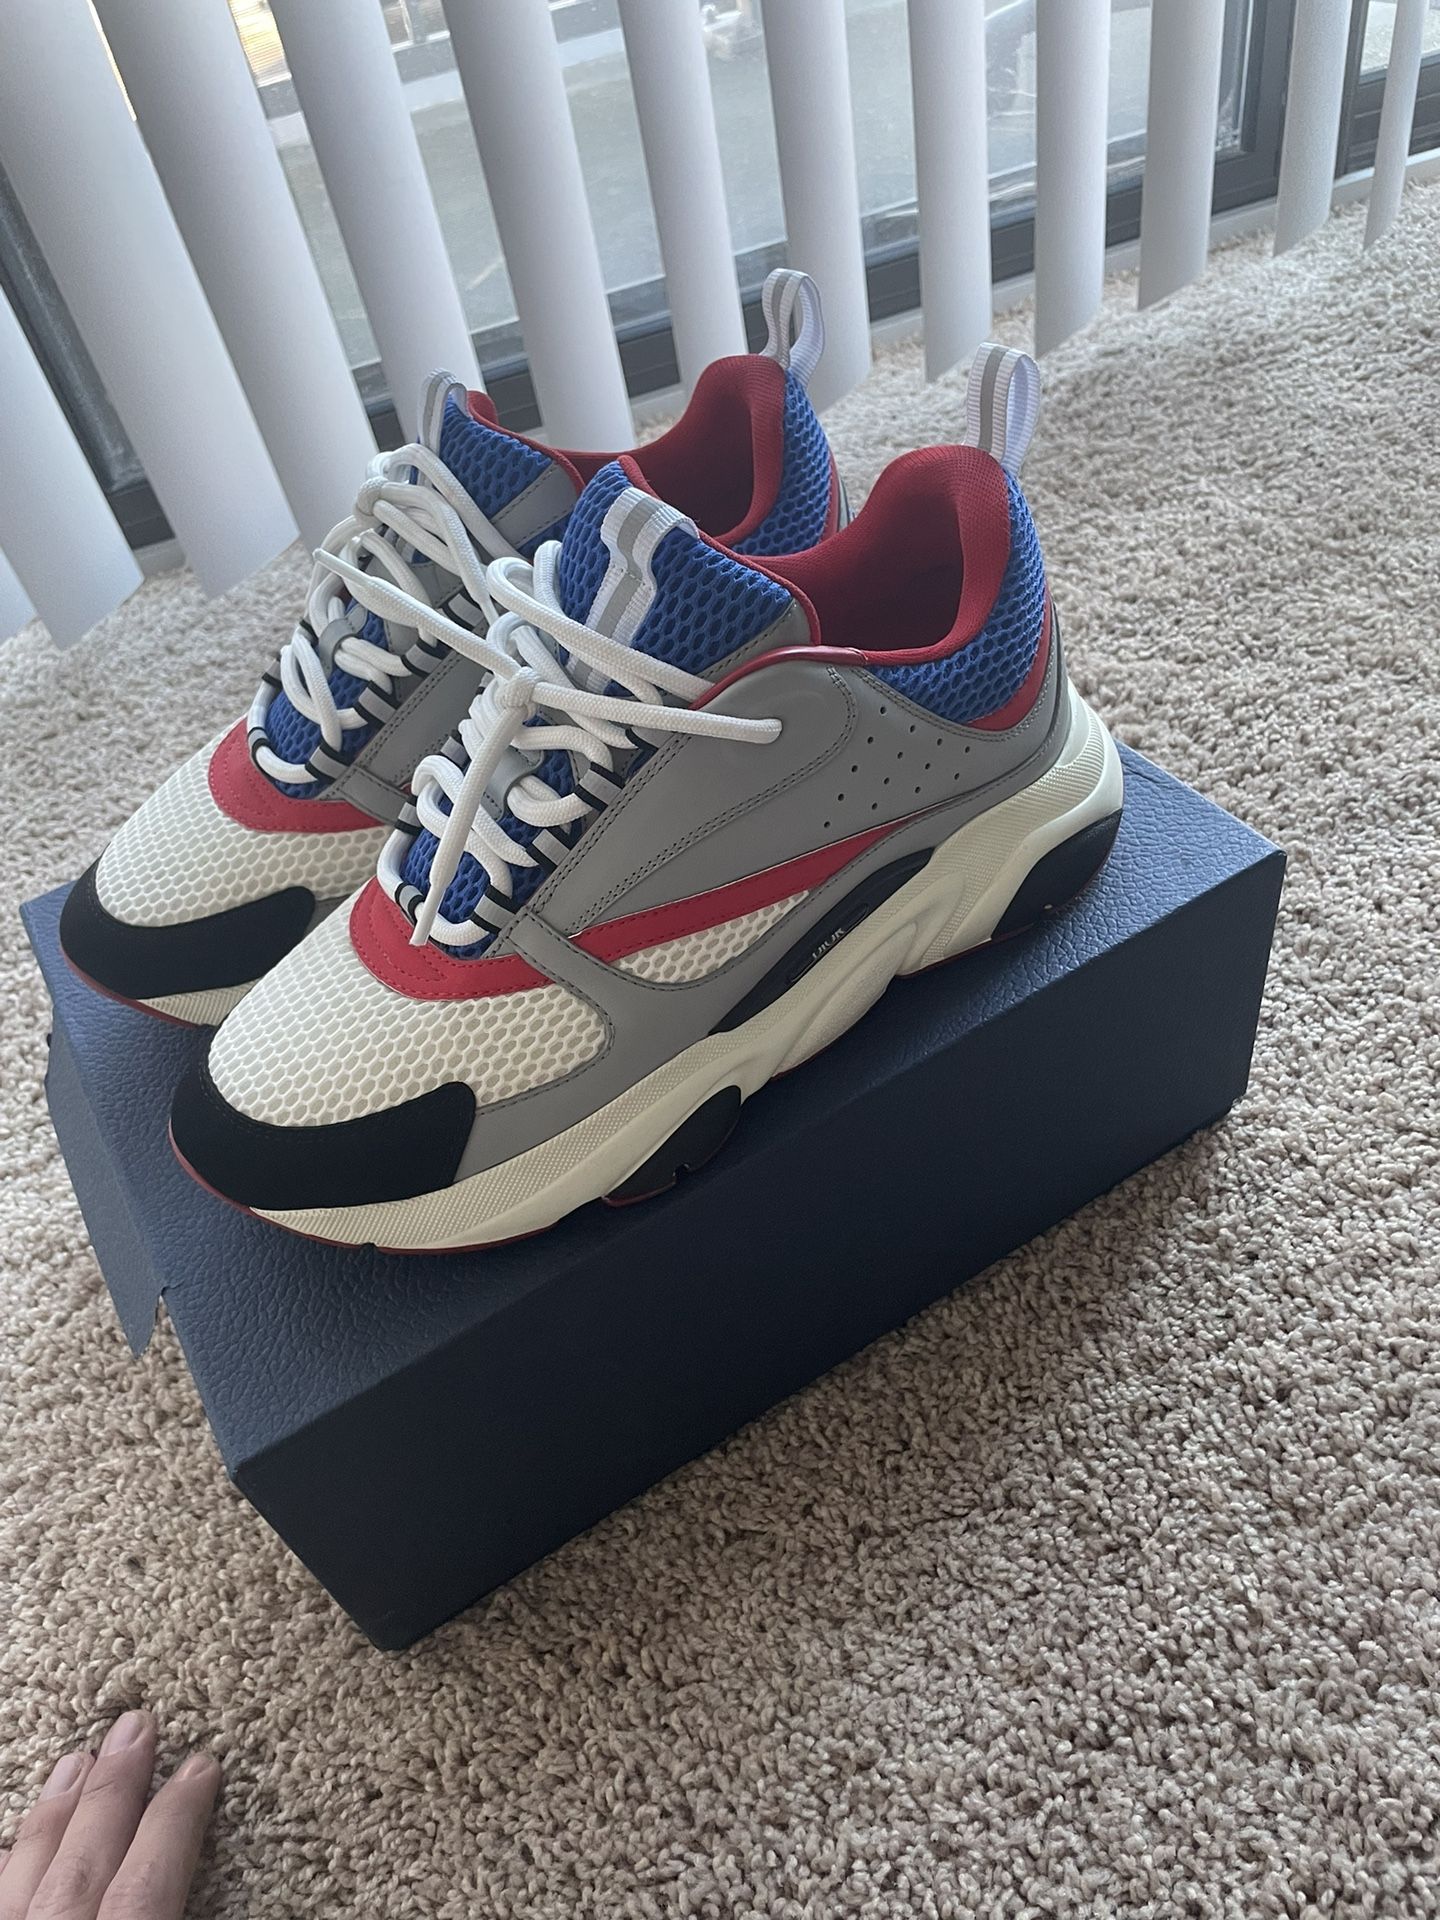 dior b22 red/blue/white size 42/9 AUTHENTIC for Sale in Washington